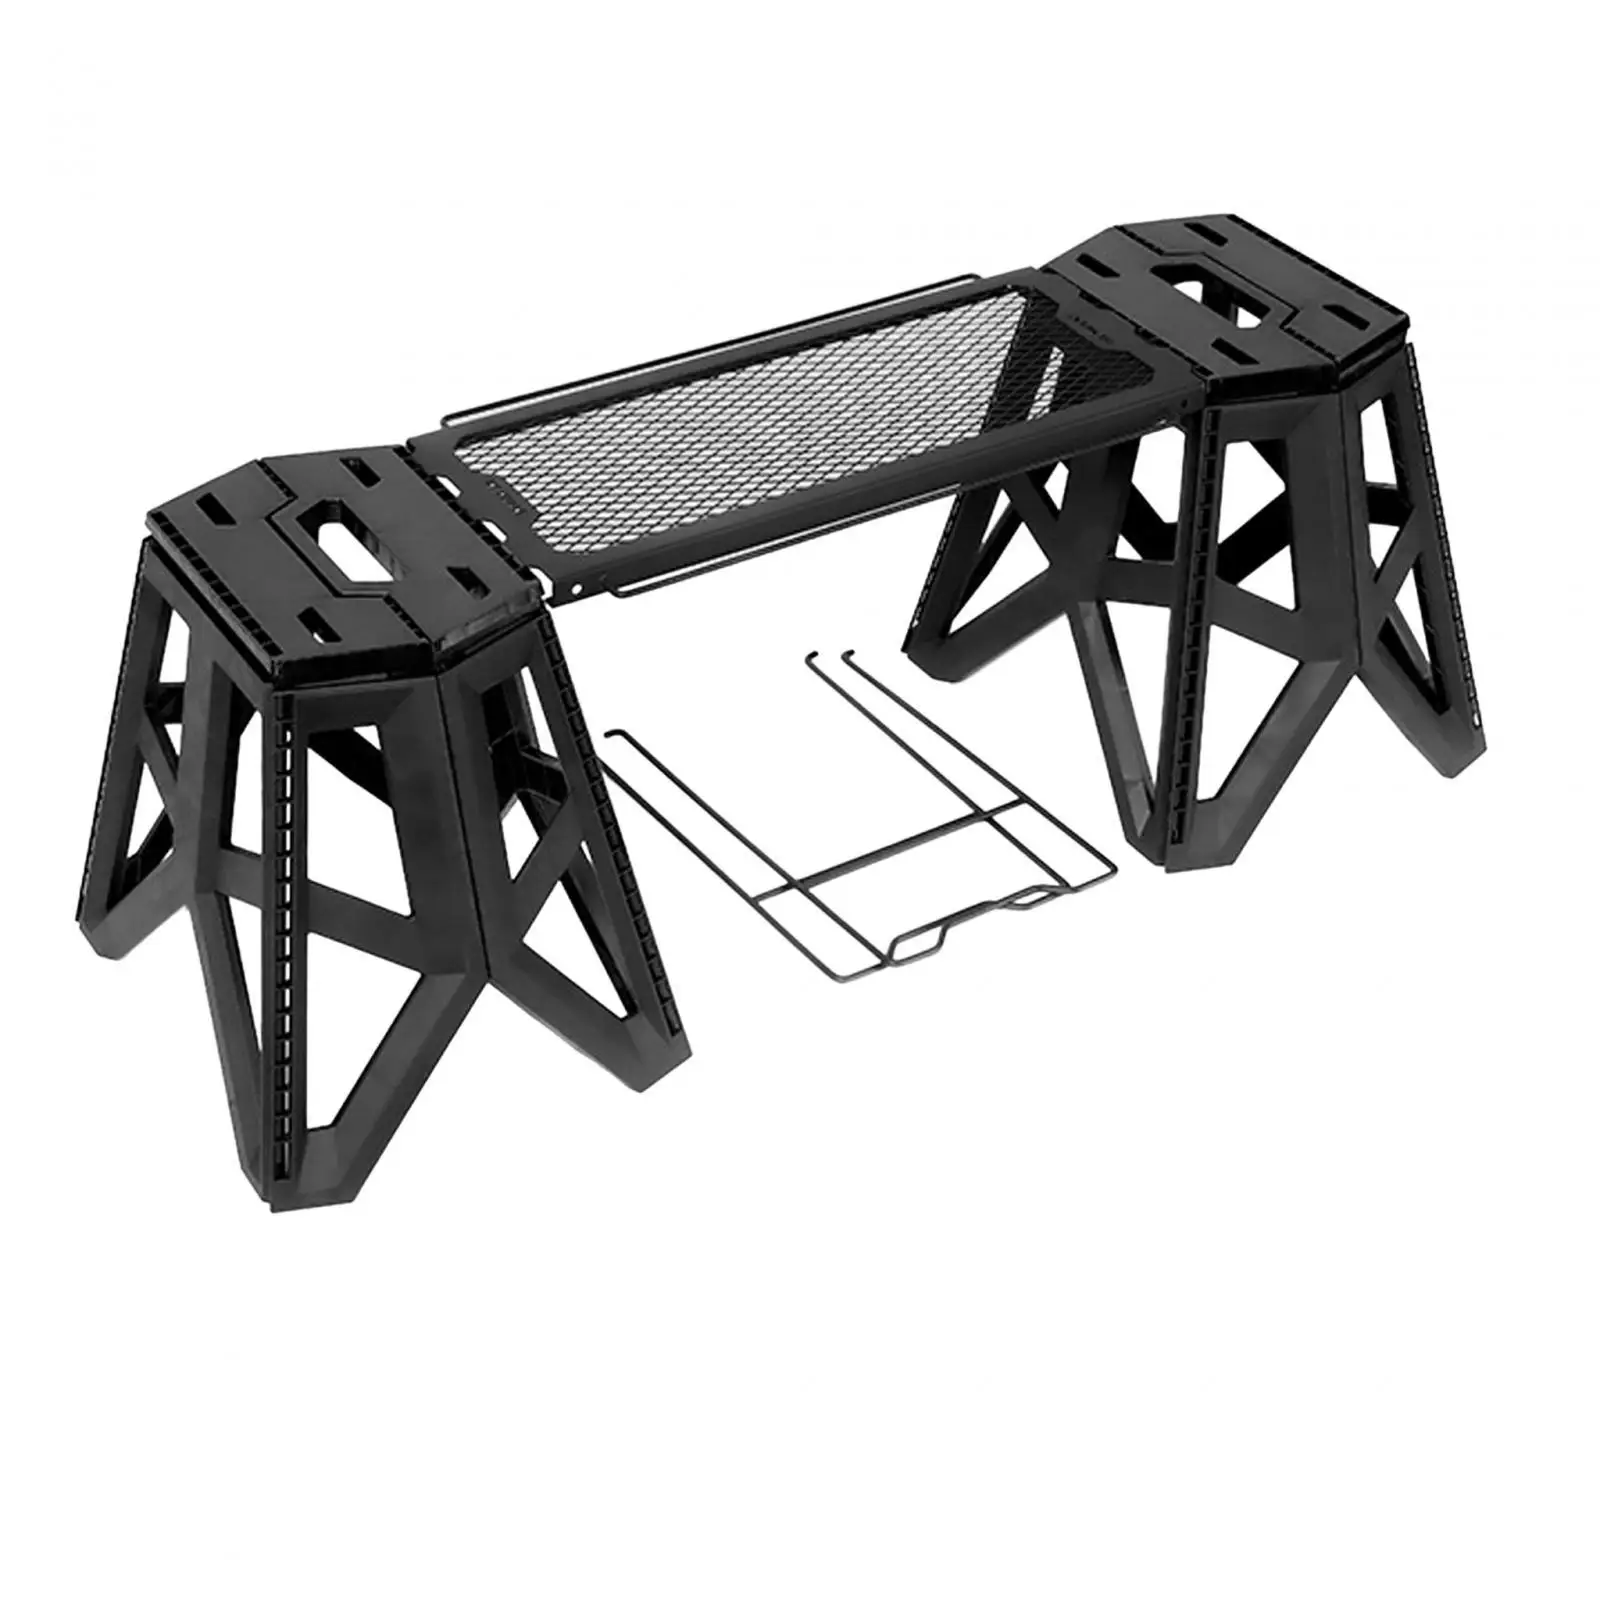 Camping Table and Stool Set, Folding Table Small Storage Rack, Collapsible Stool, Folding Stool Adults for Picnic Cooking